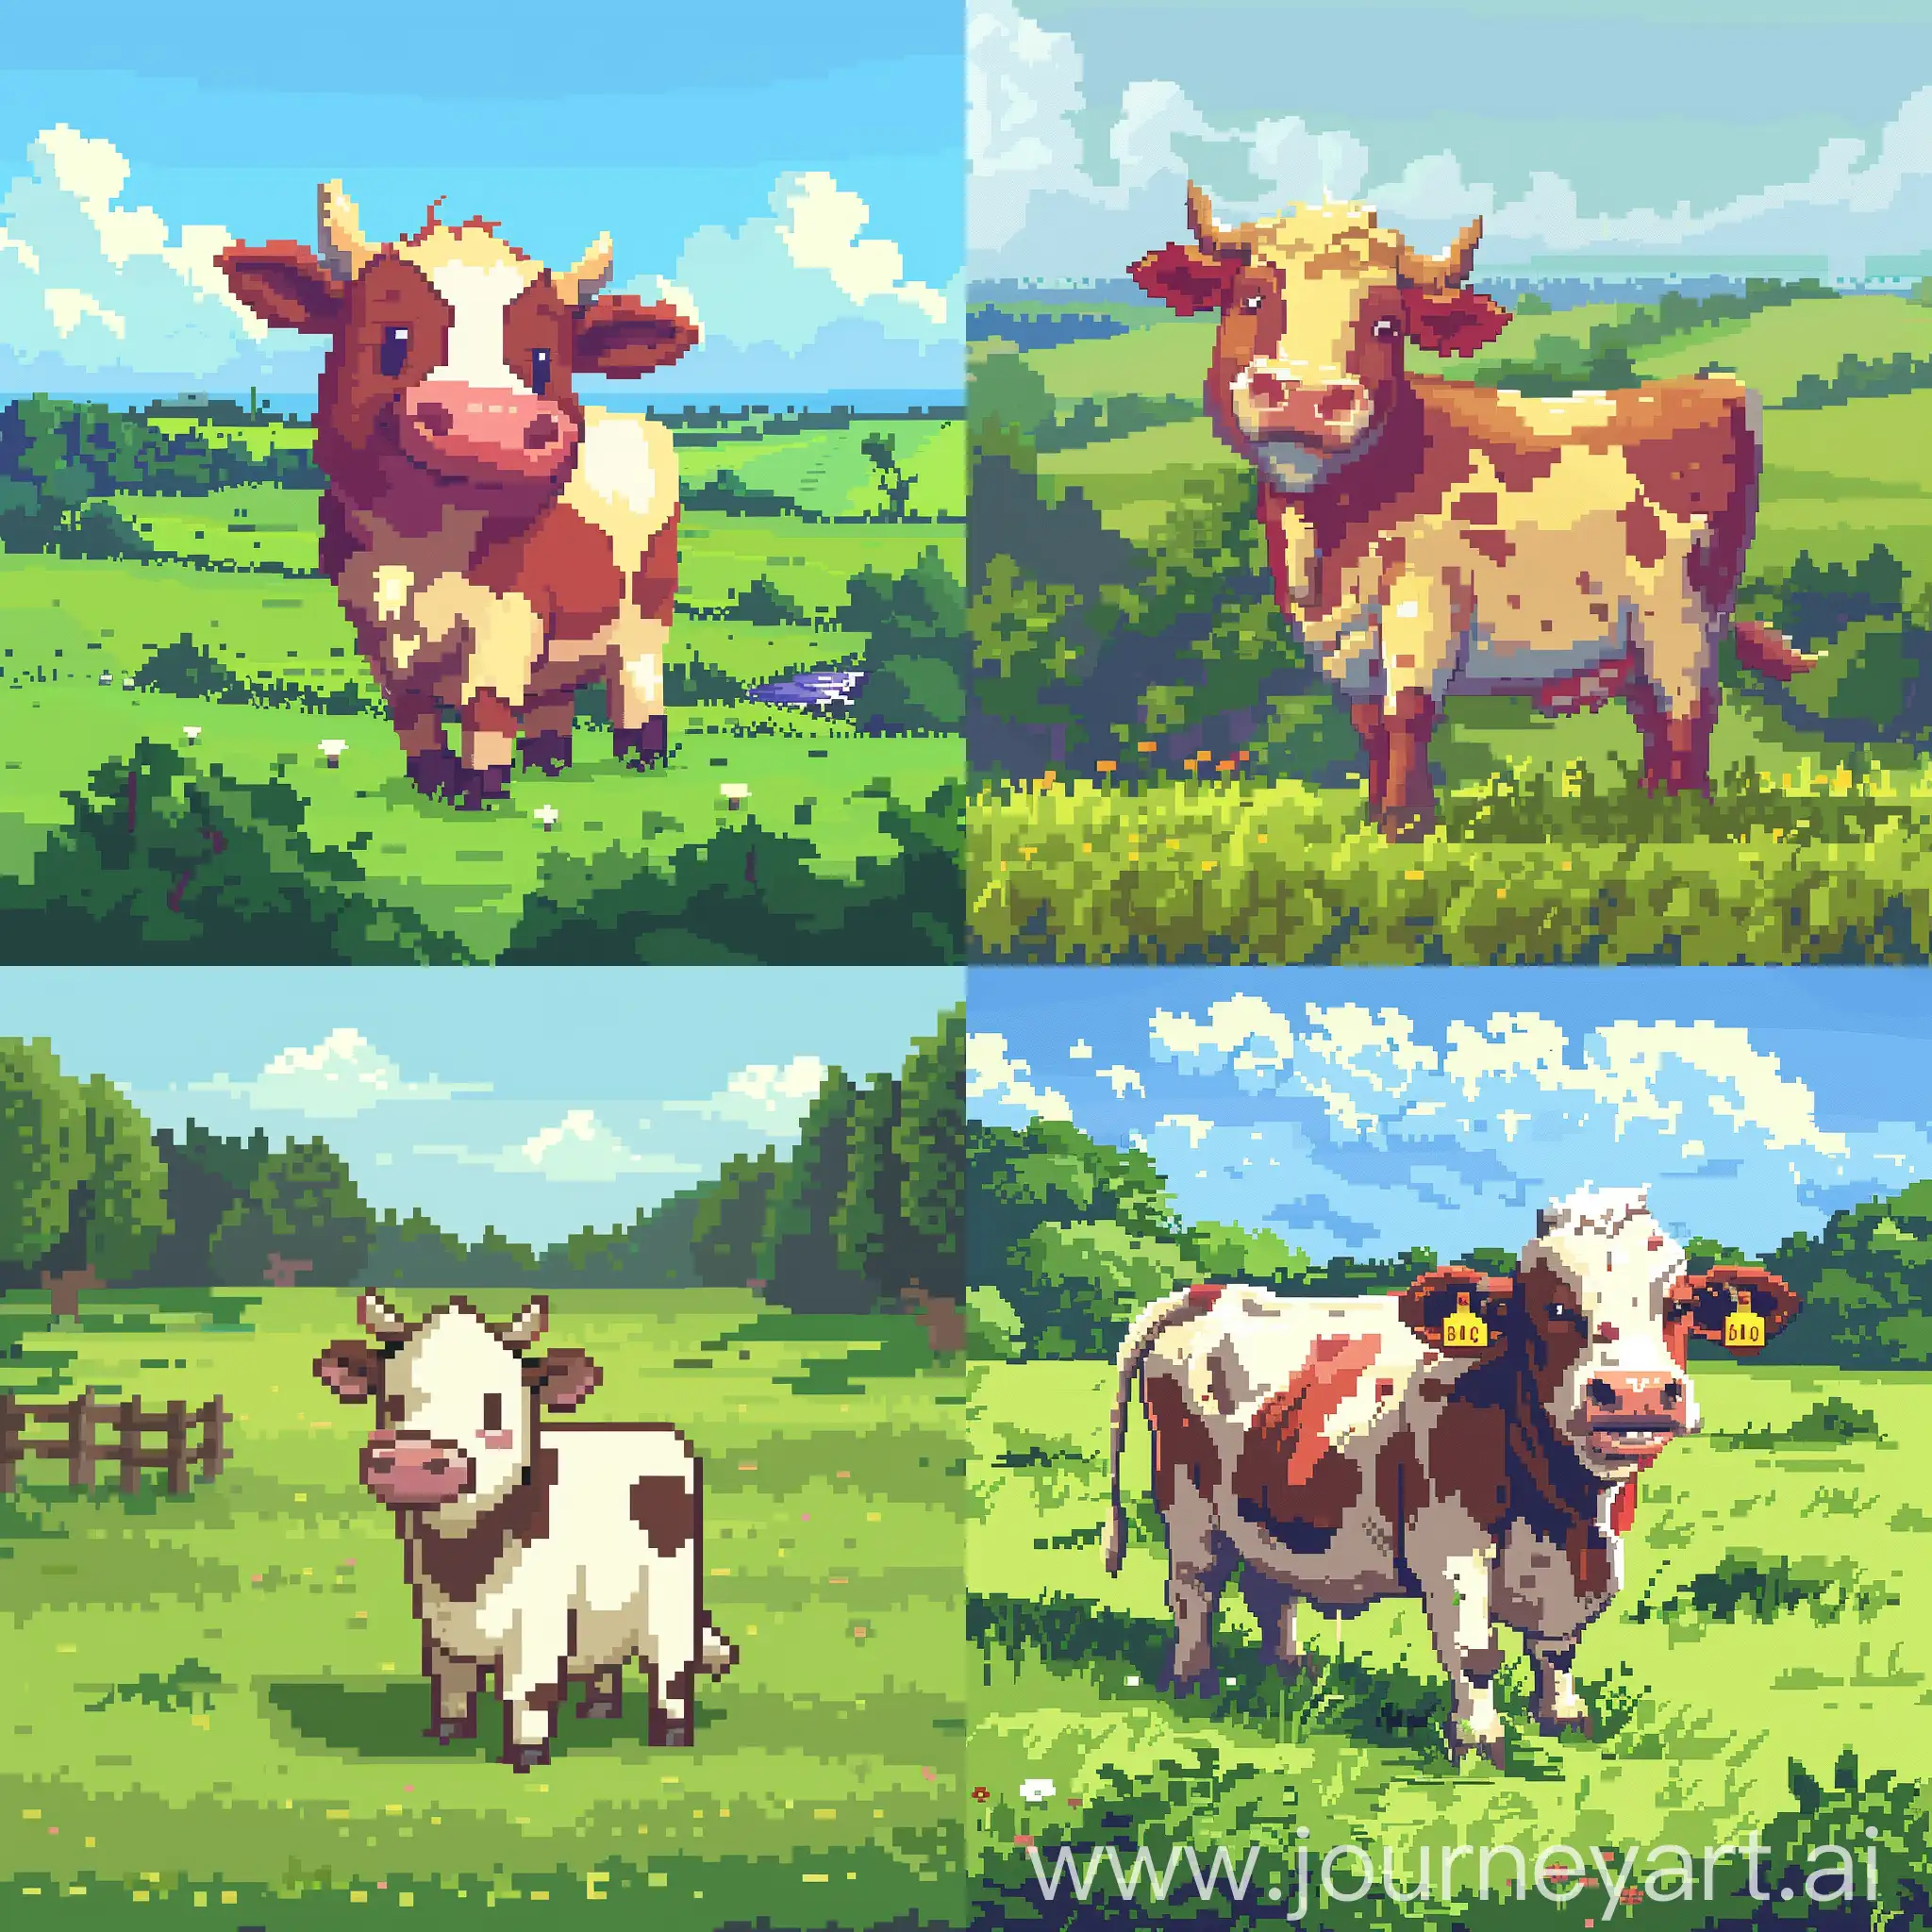 generate image of a cowsay in green fields saying "Dev lore and clichés to brighten your day", indie art, pixelated, chubby cute. Use image attached as reference, size 1200x630 px png